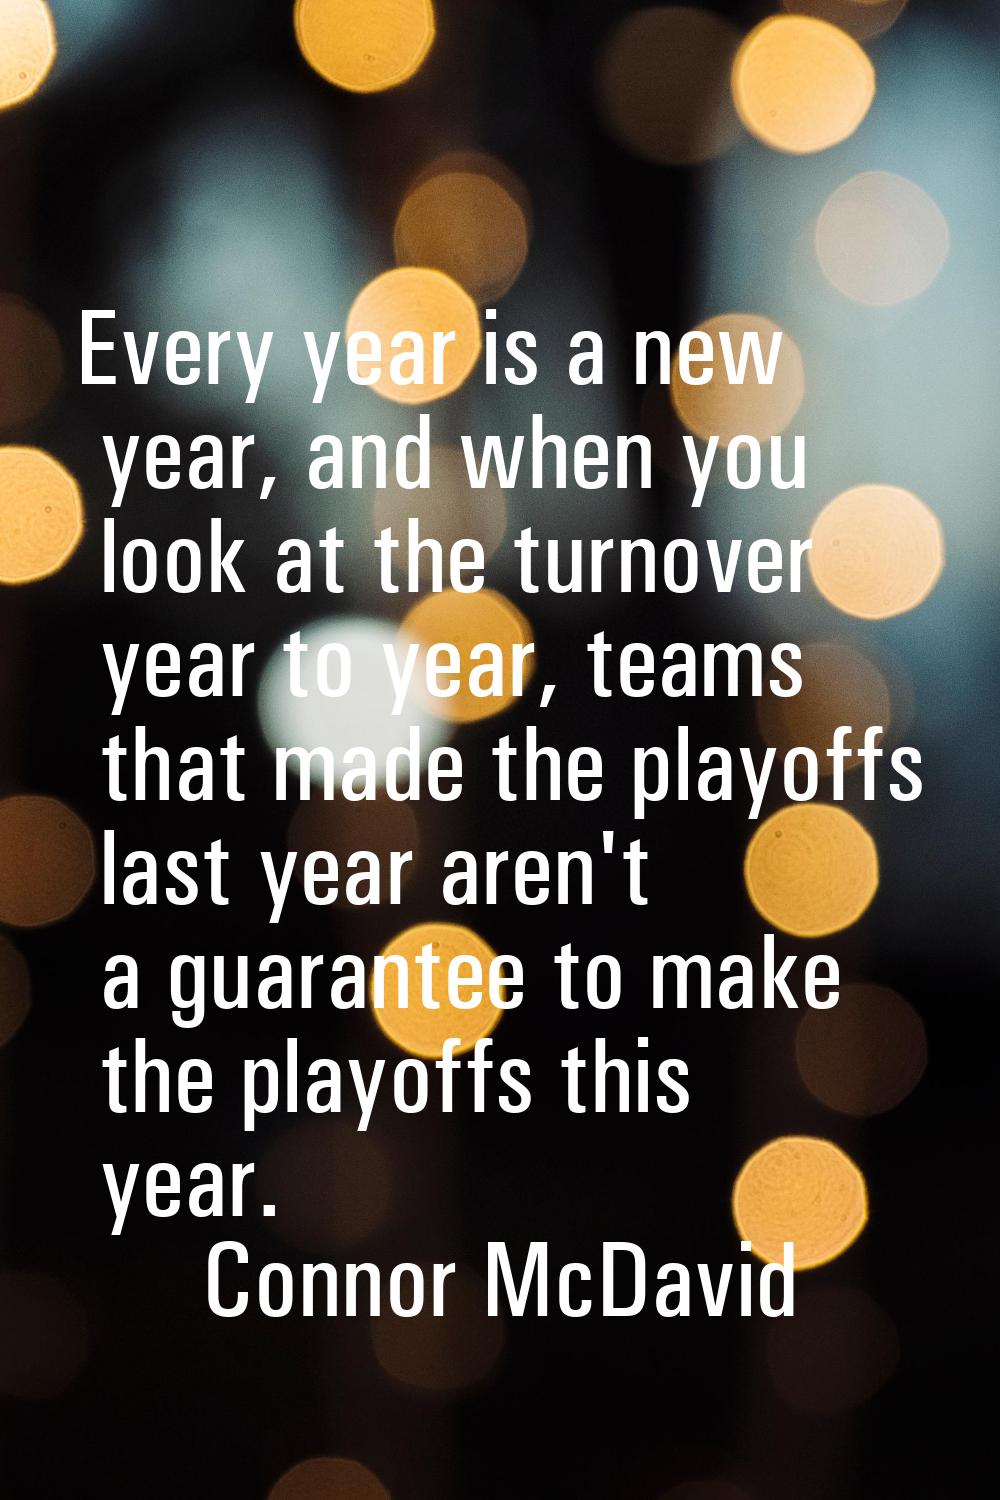 Every year is a new year, and when you look at the turnover year to year, teams that made the playo